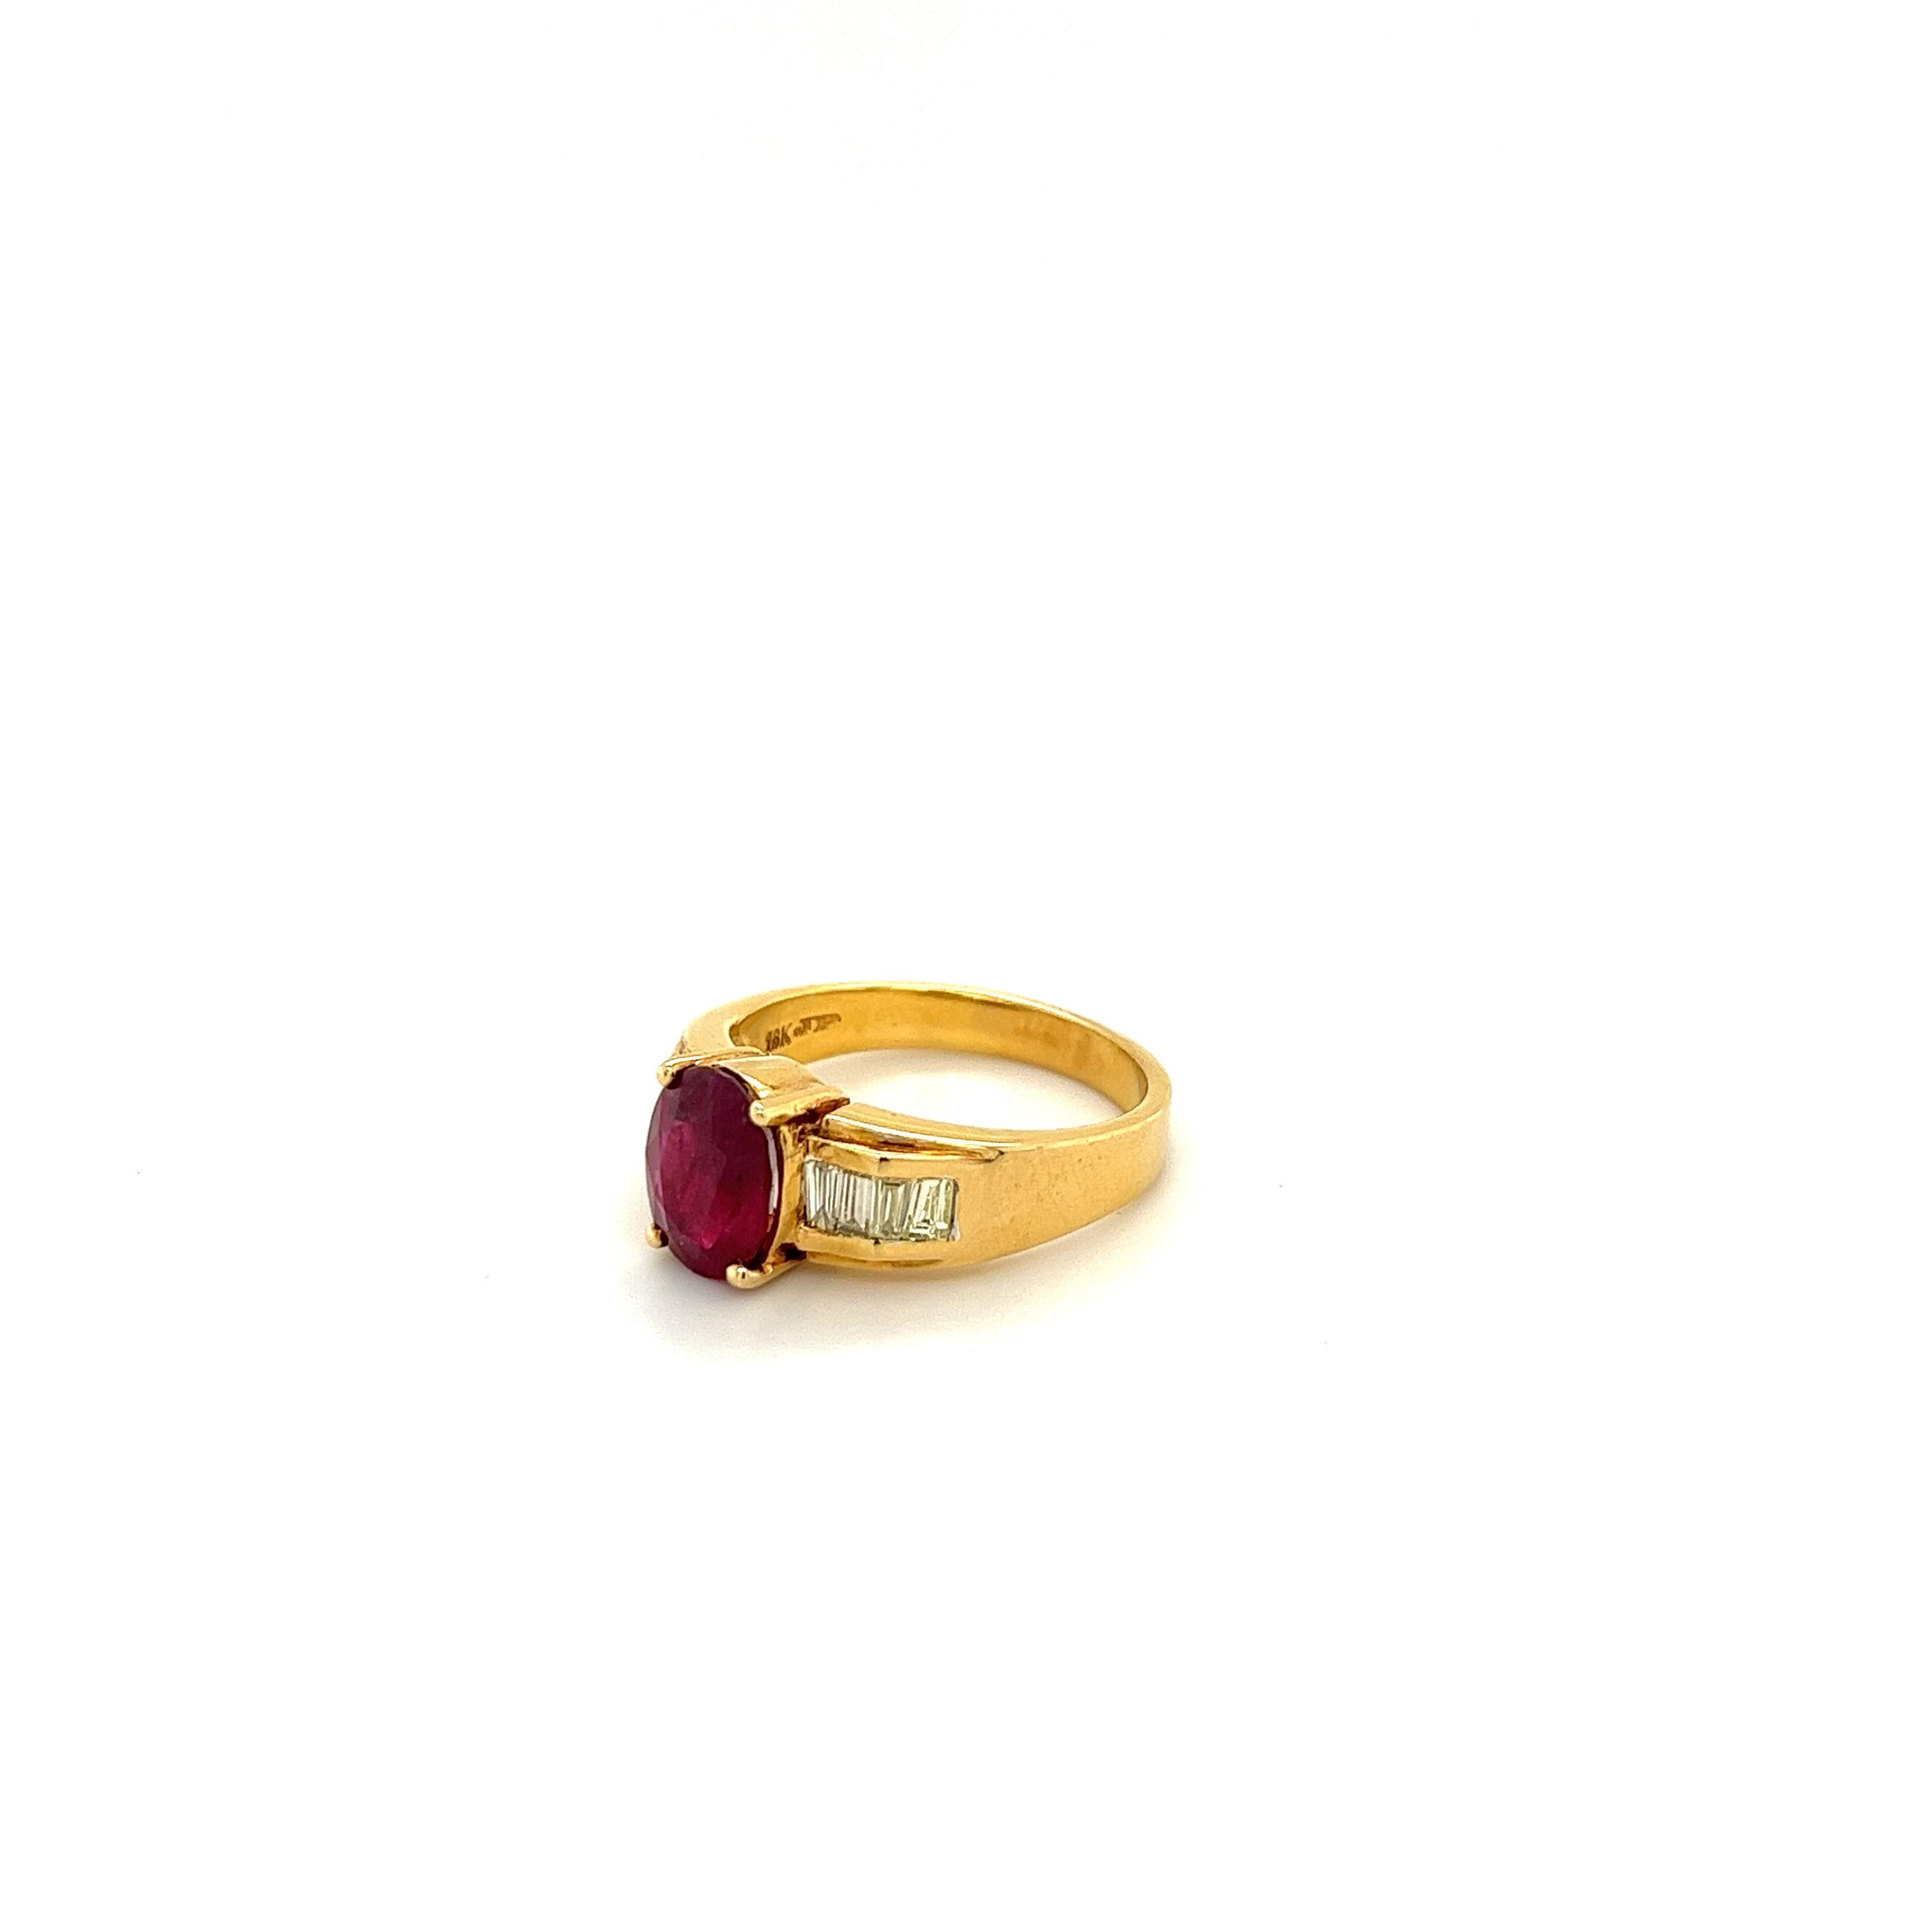 Oval-cut natural Ruby adorned with natural Baguette-cut diamond side-stones. Gemstones are mounted in a straight shank 18k gold classic setting. The center stone Ruby has flawless clarity and refracts deep bright red color hues. Especially under